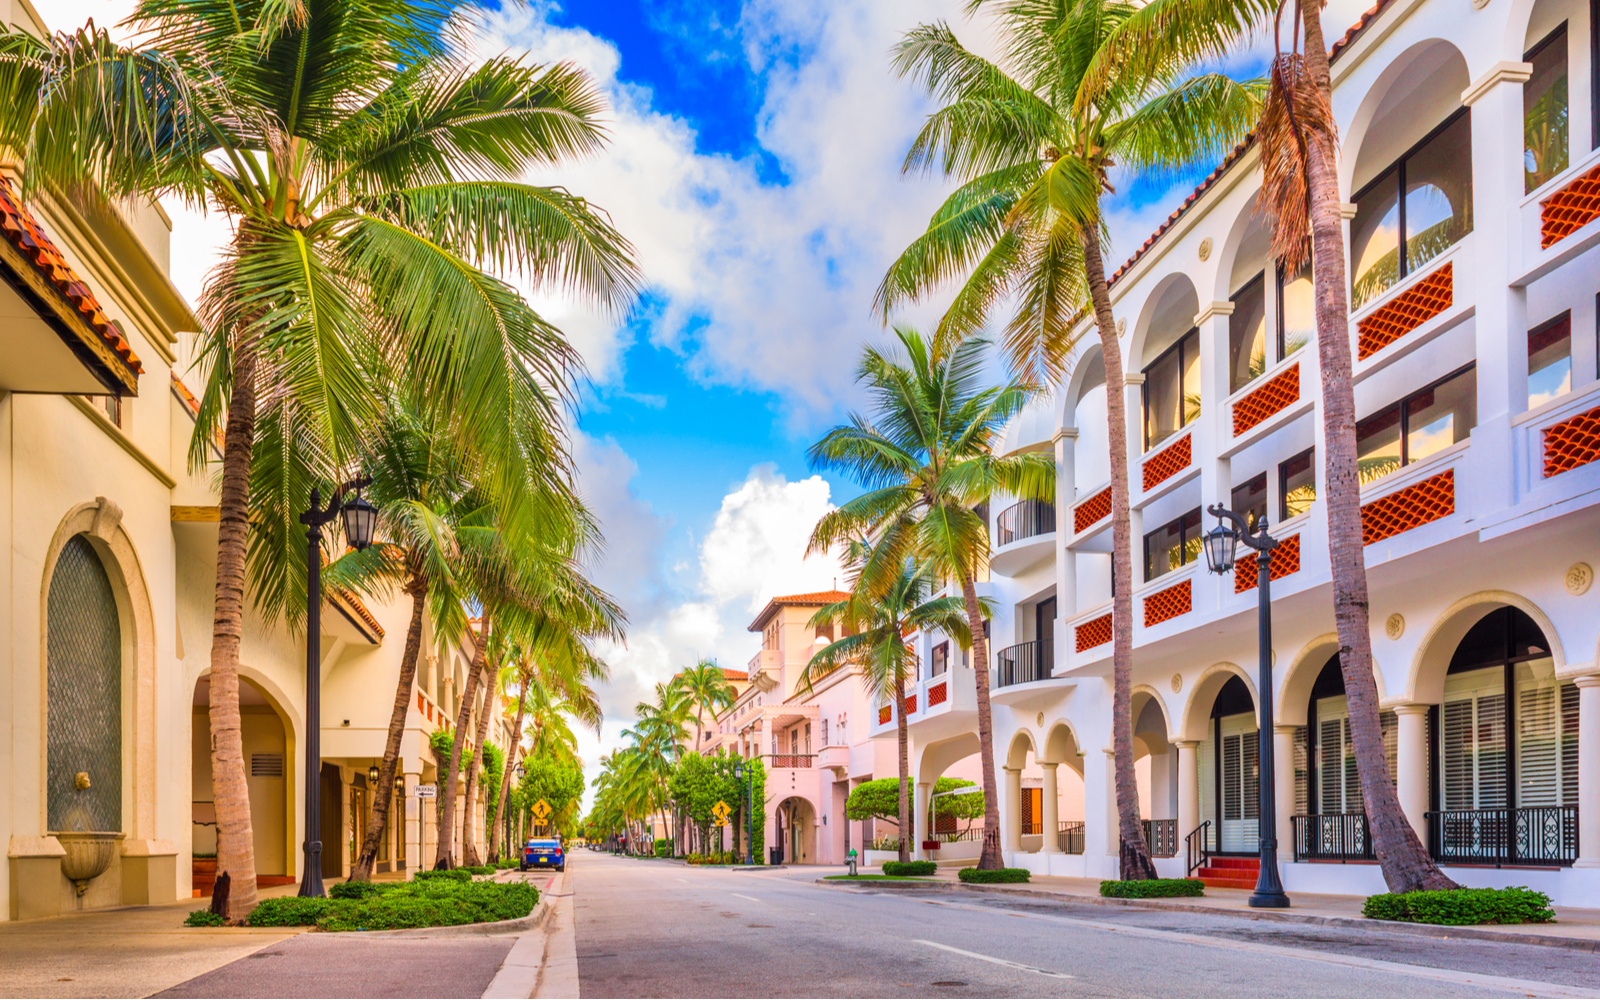 Is Palm Beach Safe? | Safety Concerns & Travel Tips